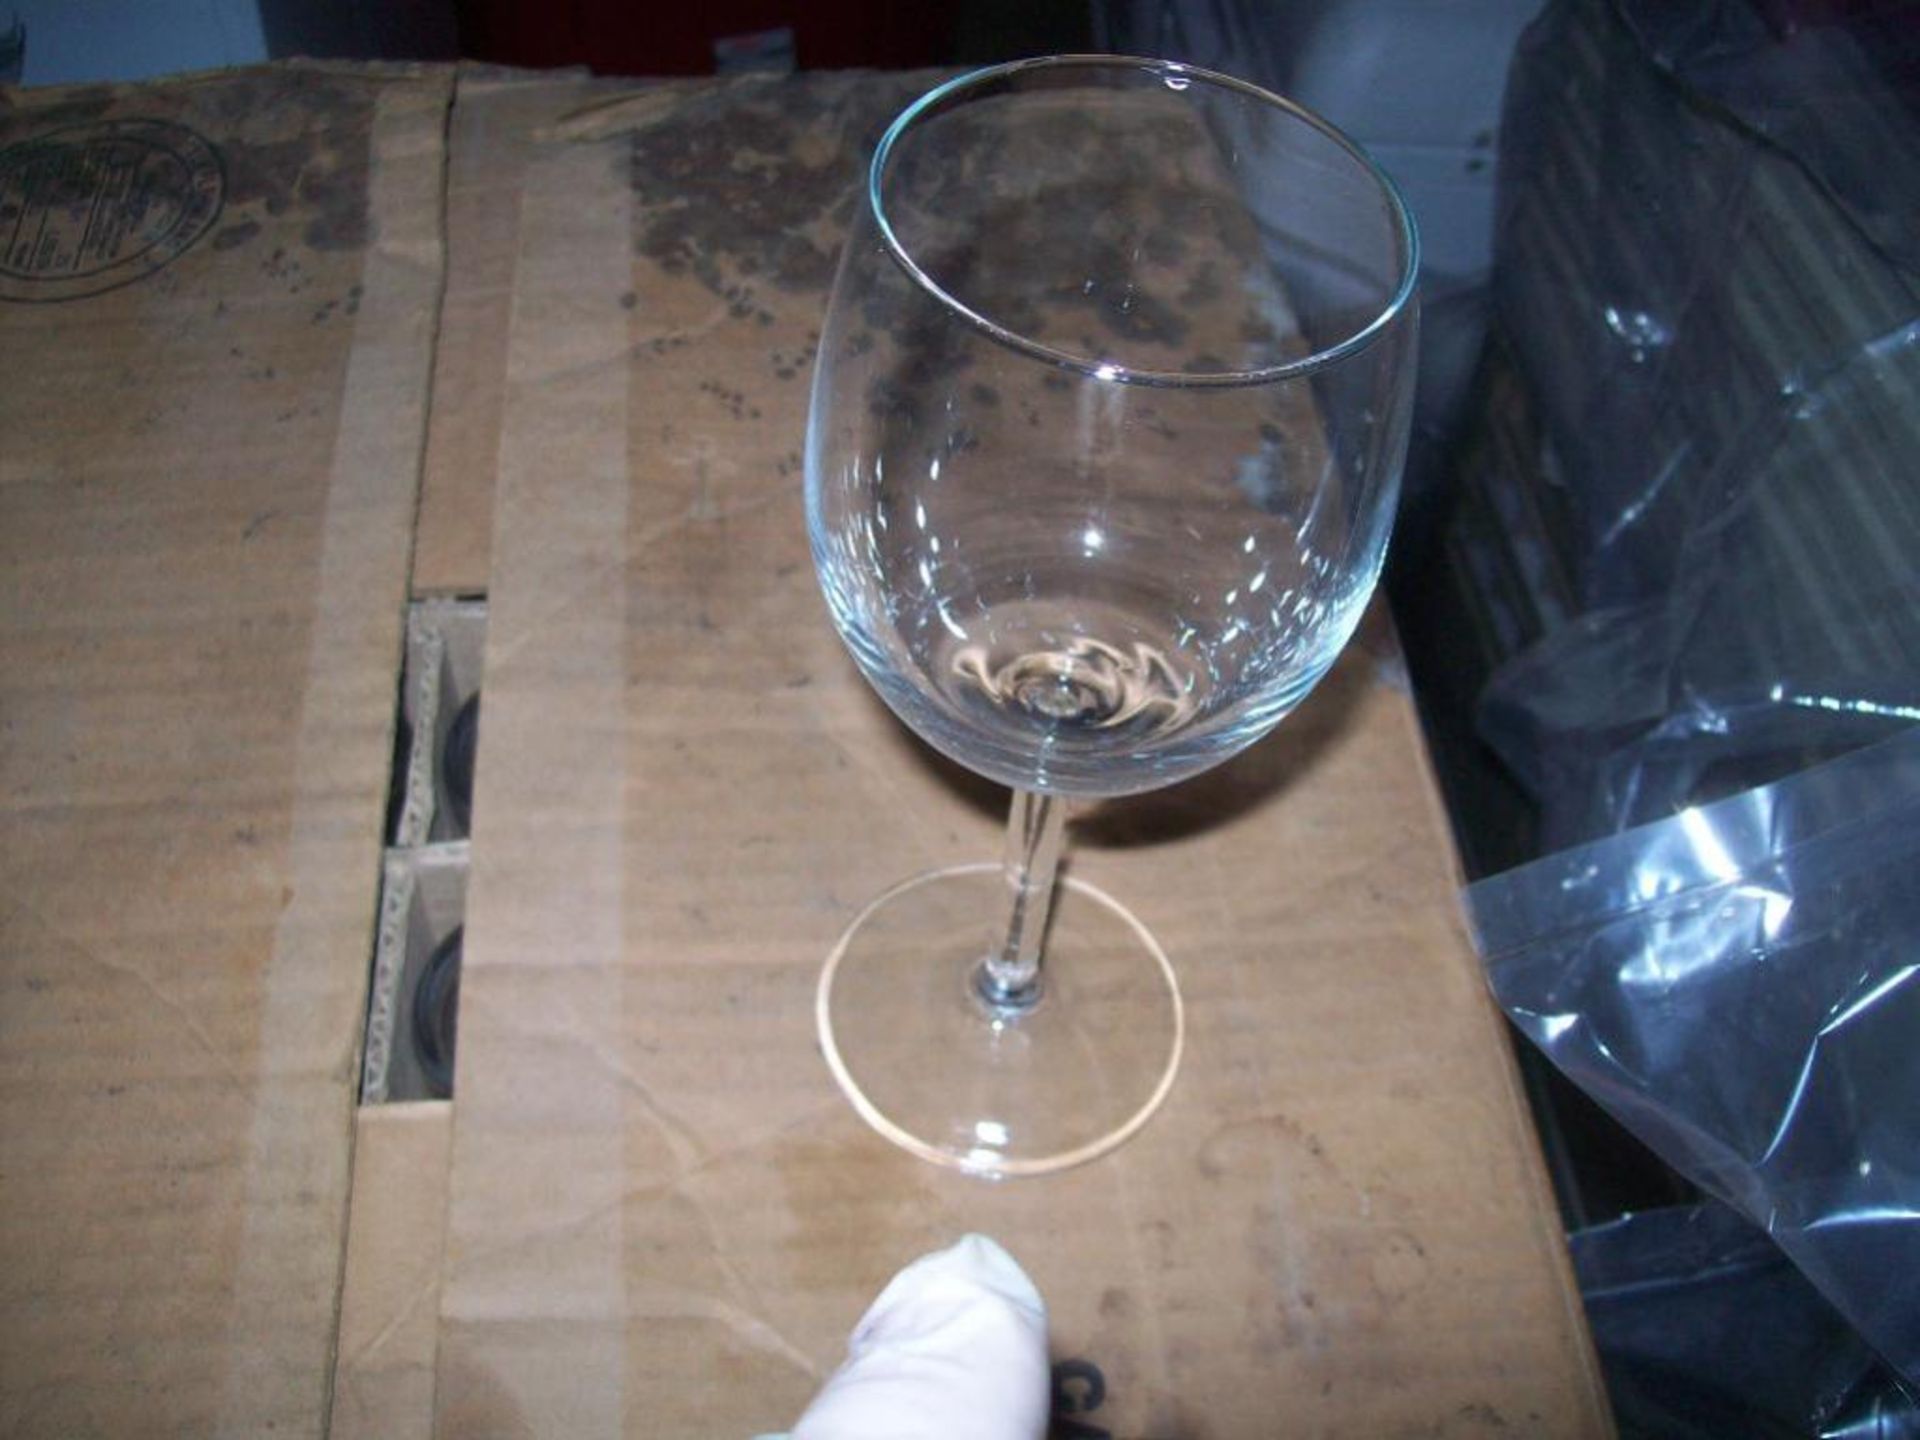 Wine glasses, clear & footed-in (6) crates - $8 additional charge per crate